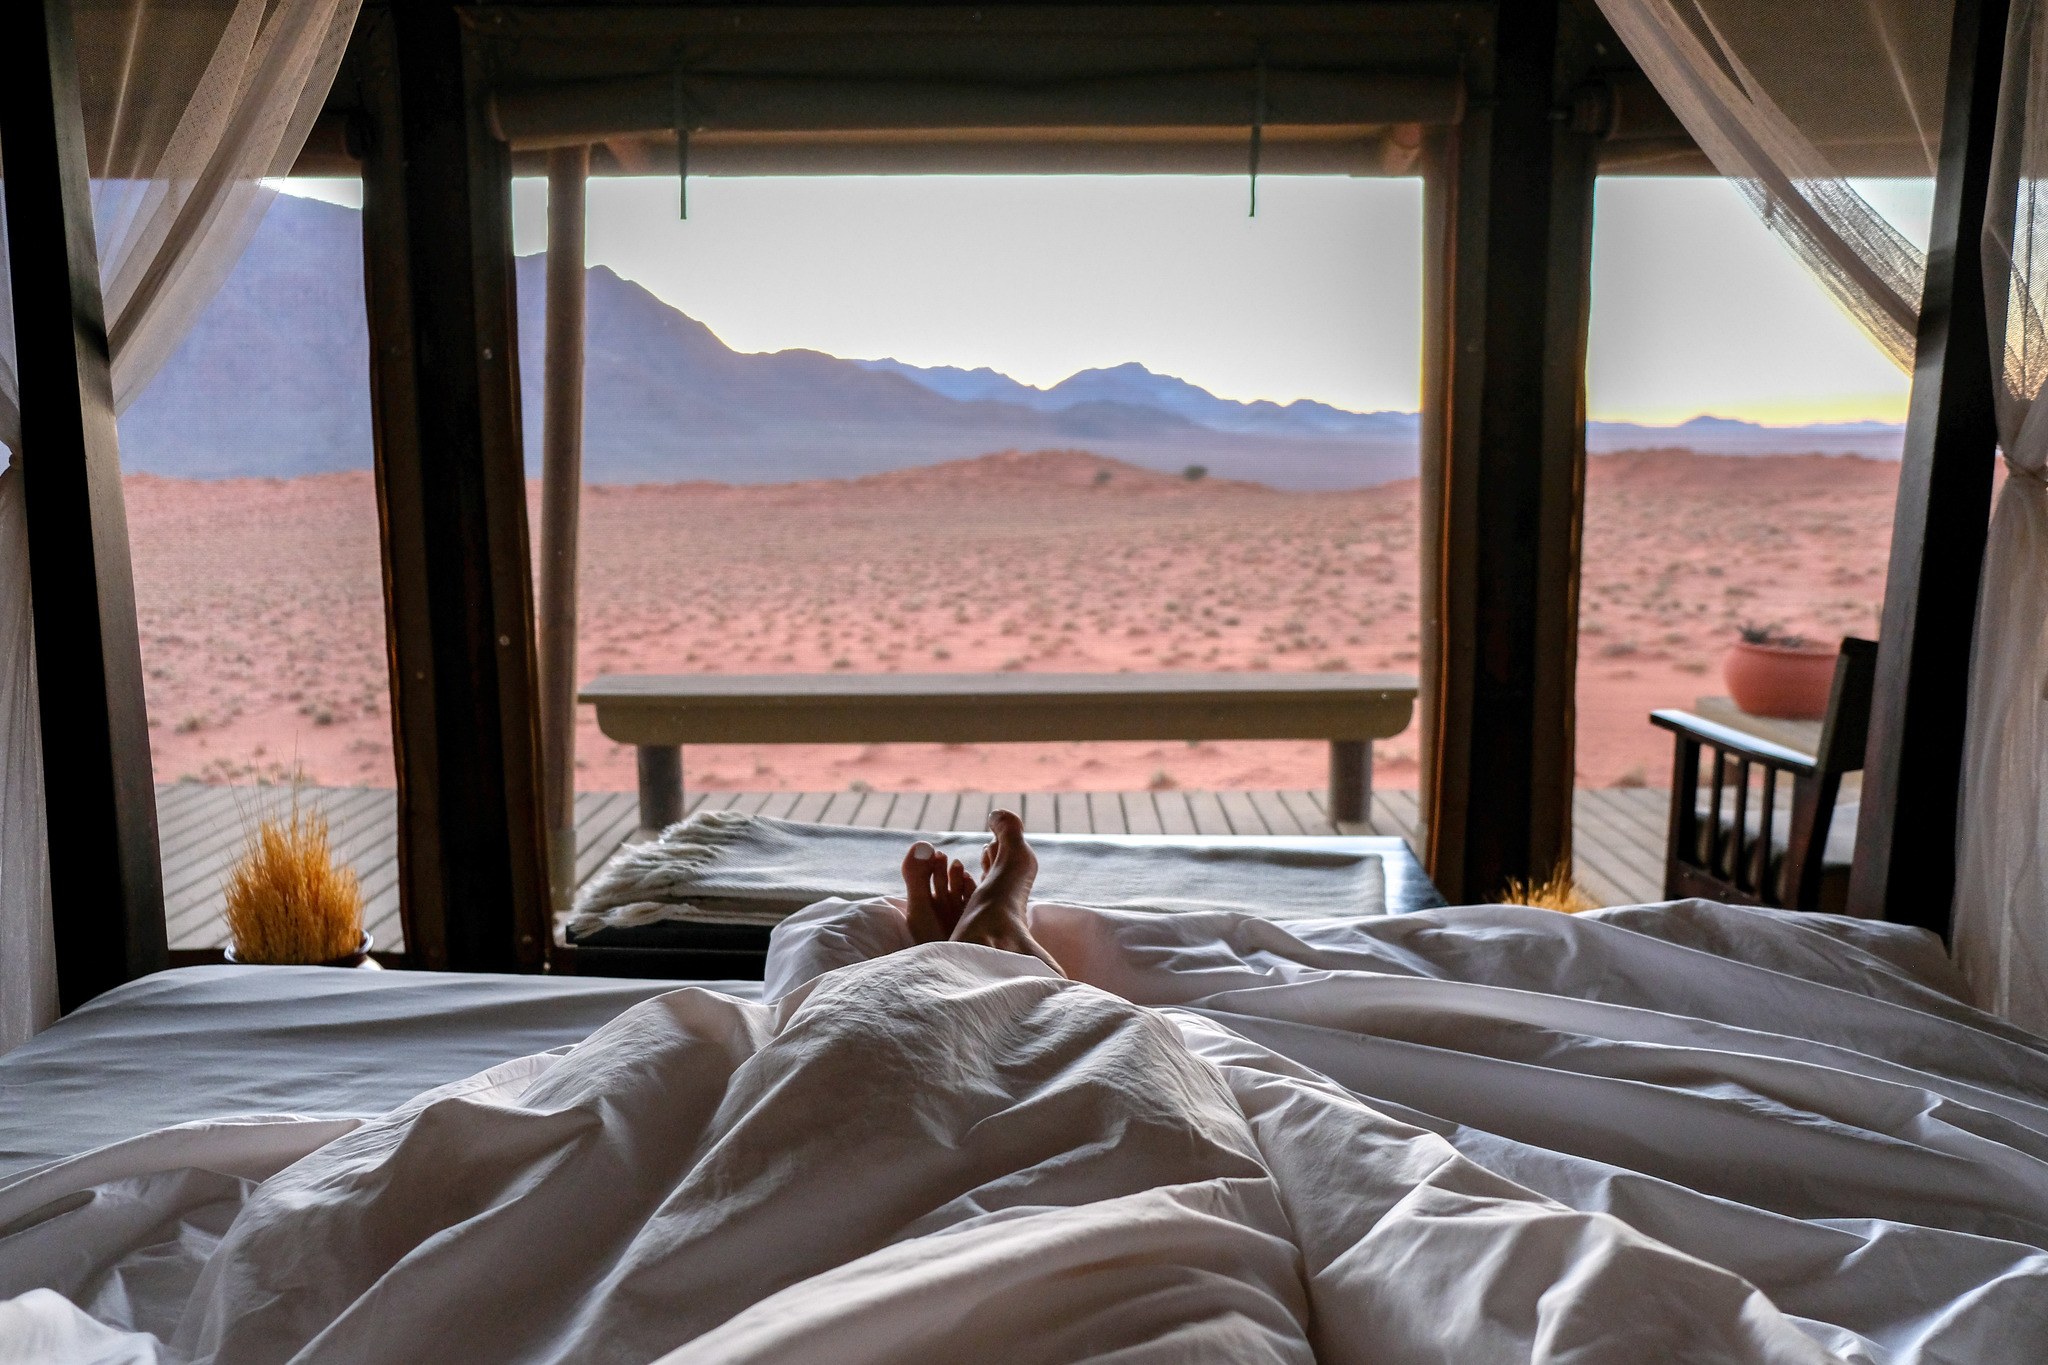 Waking up in a luxury tent in Namibia